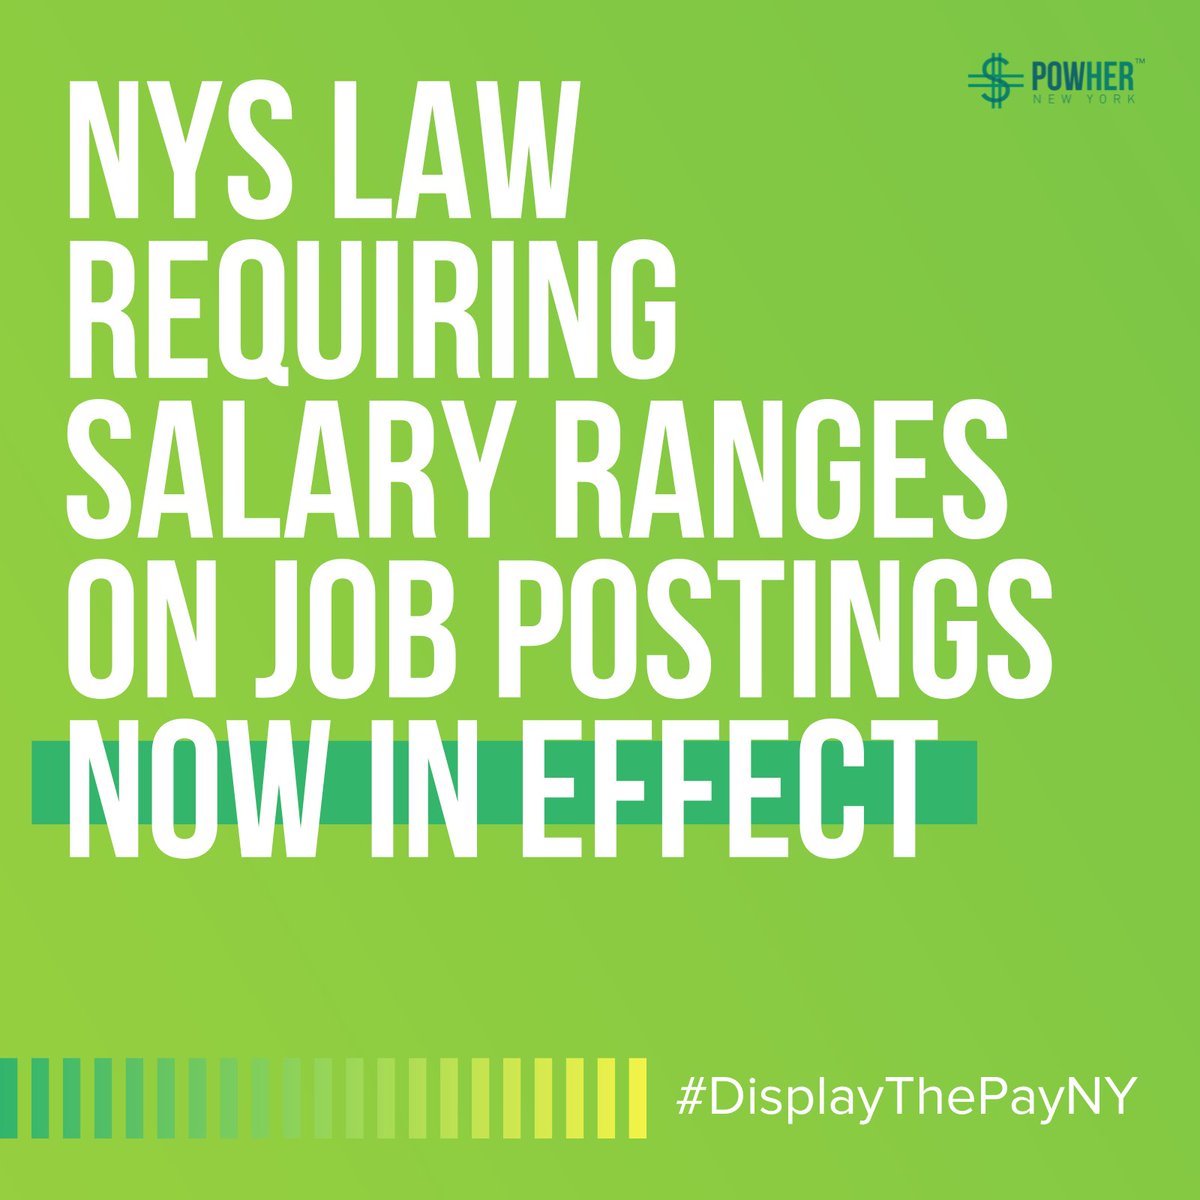 Now NYS businesses will have to #DisplayThePayNY by posting pay ranges w/ job listings. This is crucial information for individuals to inform their job searches and career development #EqualPayNY